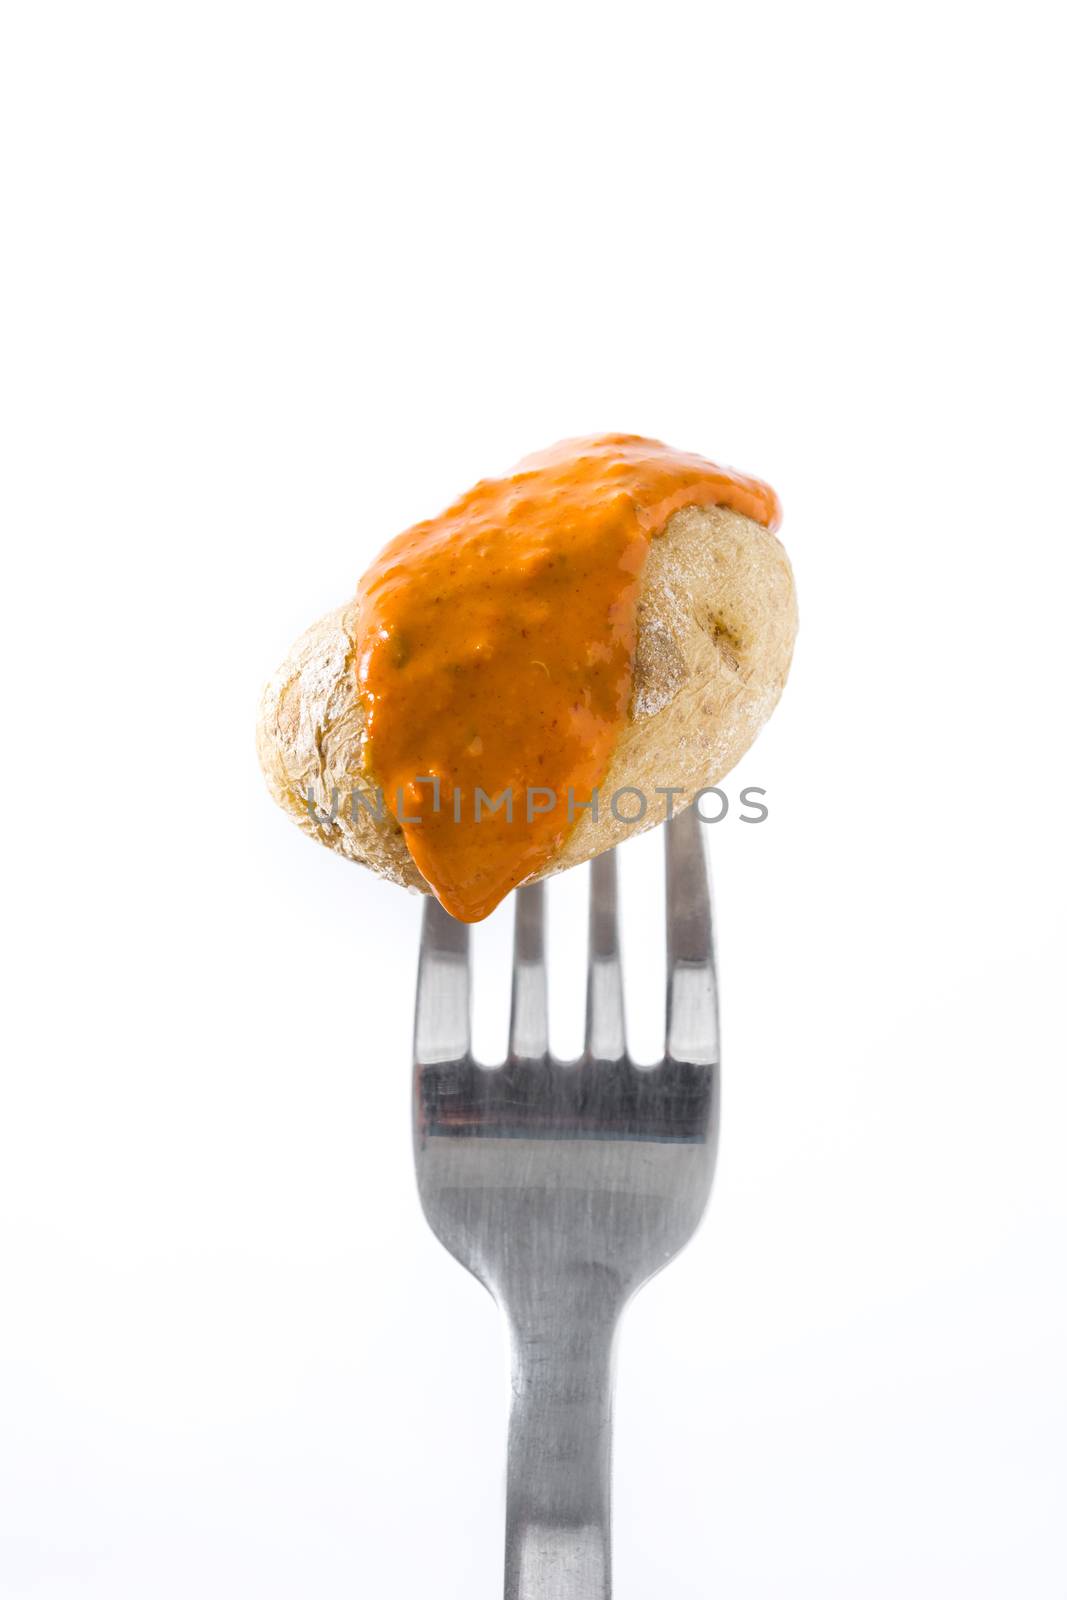 Canarian potato (papa arrugada) with mojo sauce on a fork isolated on white background by chandlervid85